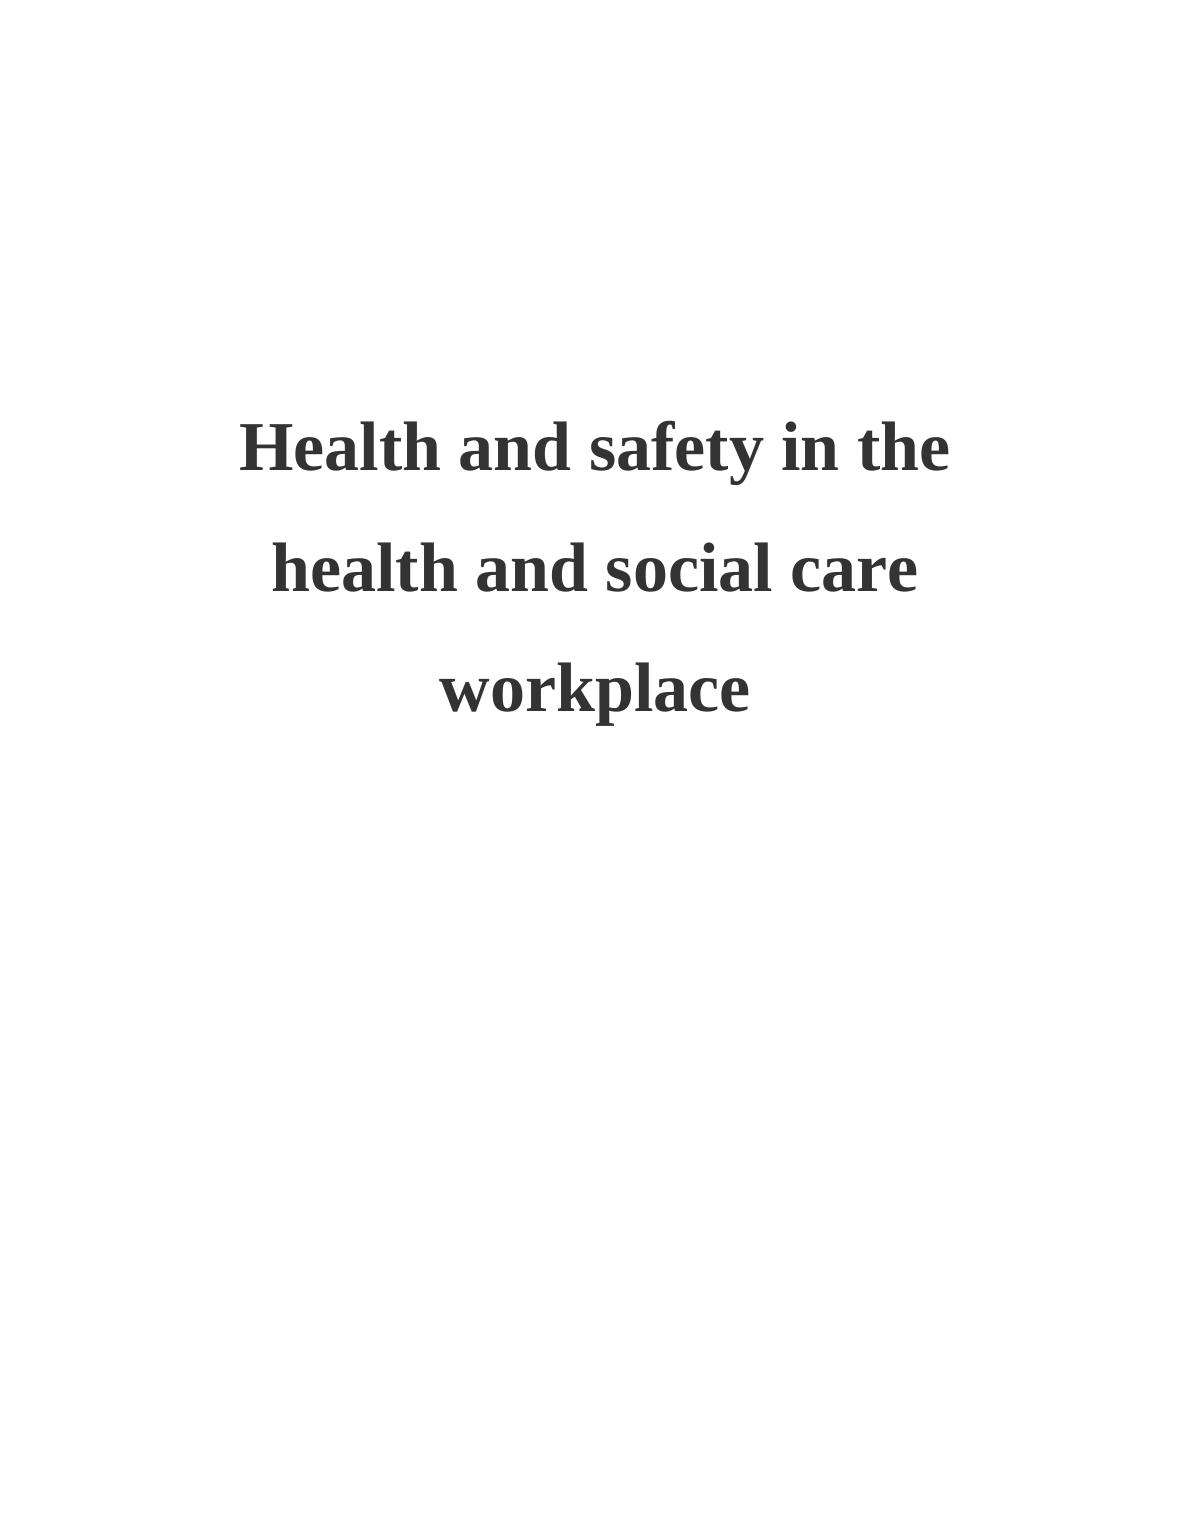 Health and Safety in the Health and Social Care Workplace : Report_1